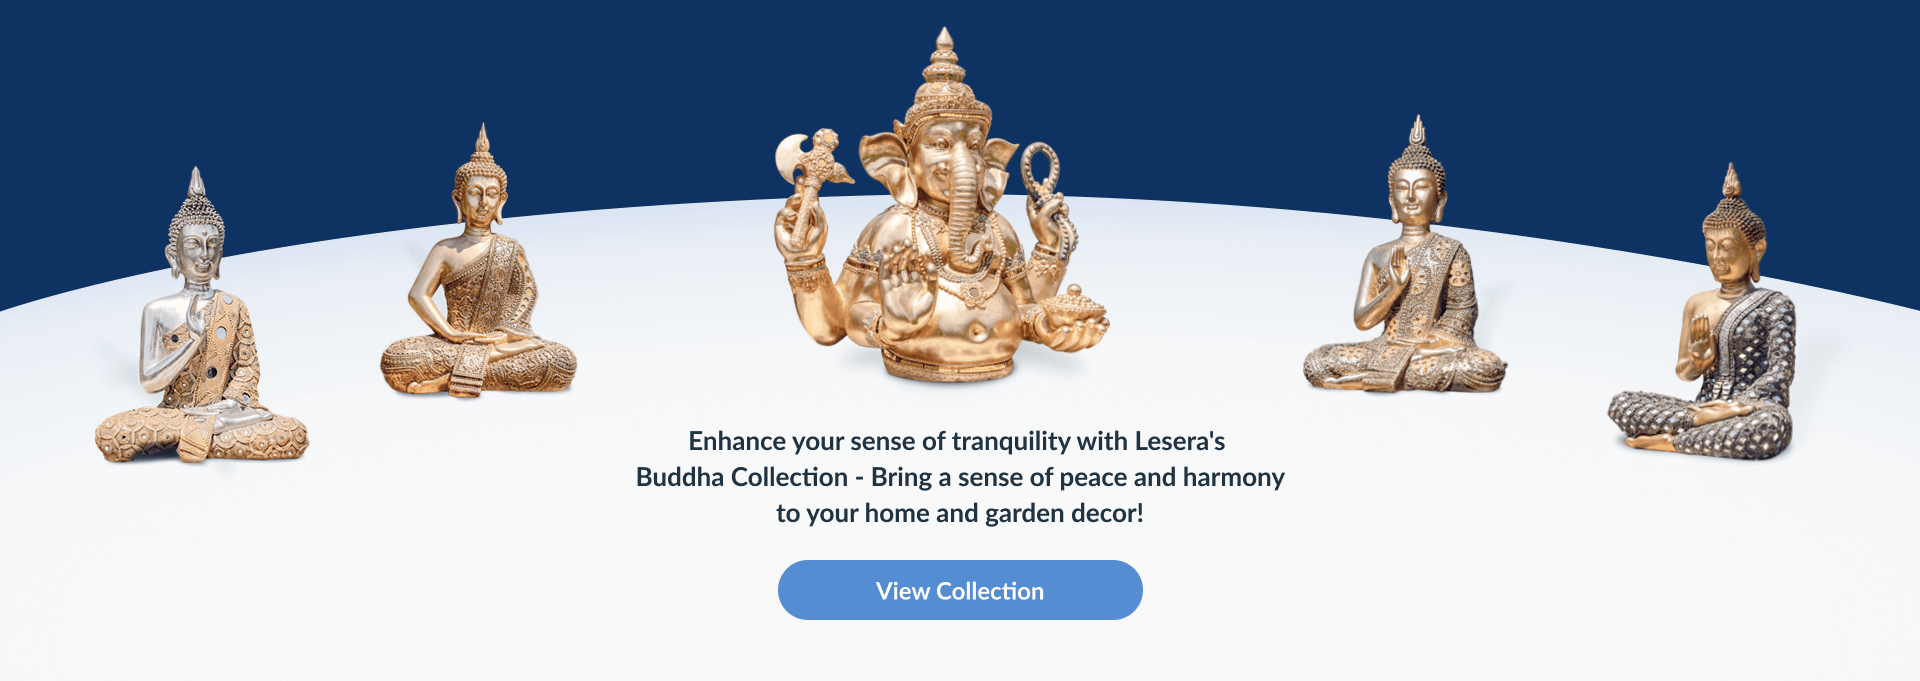 Enhance your sense of tranquility with Lesera Buddha Collection - Bring a sense of peace and harmony to your home and garden decor! | View Collection